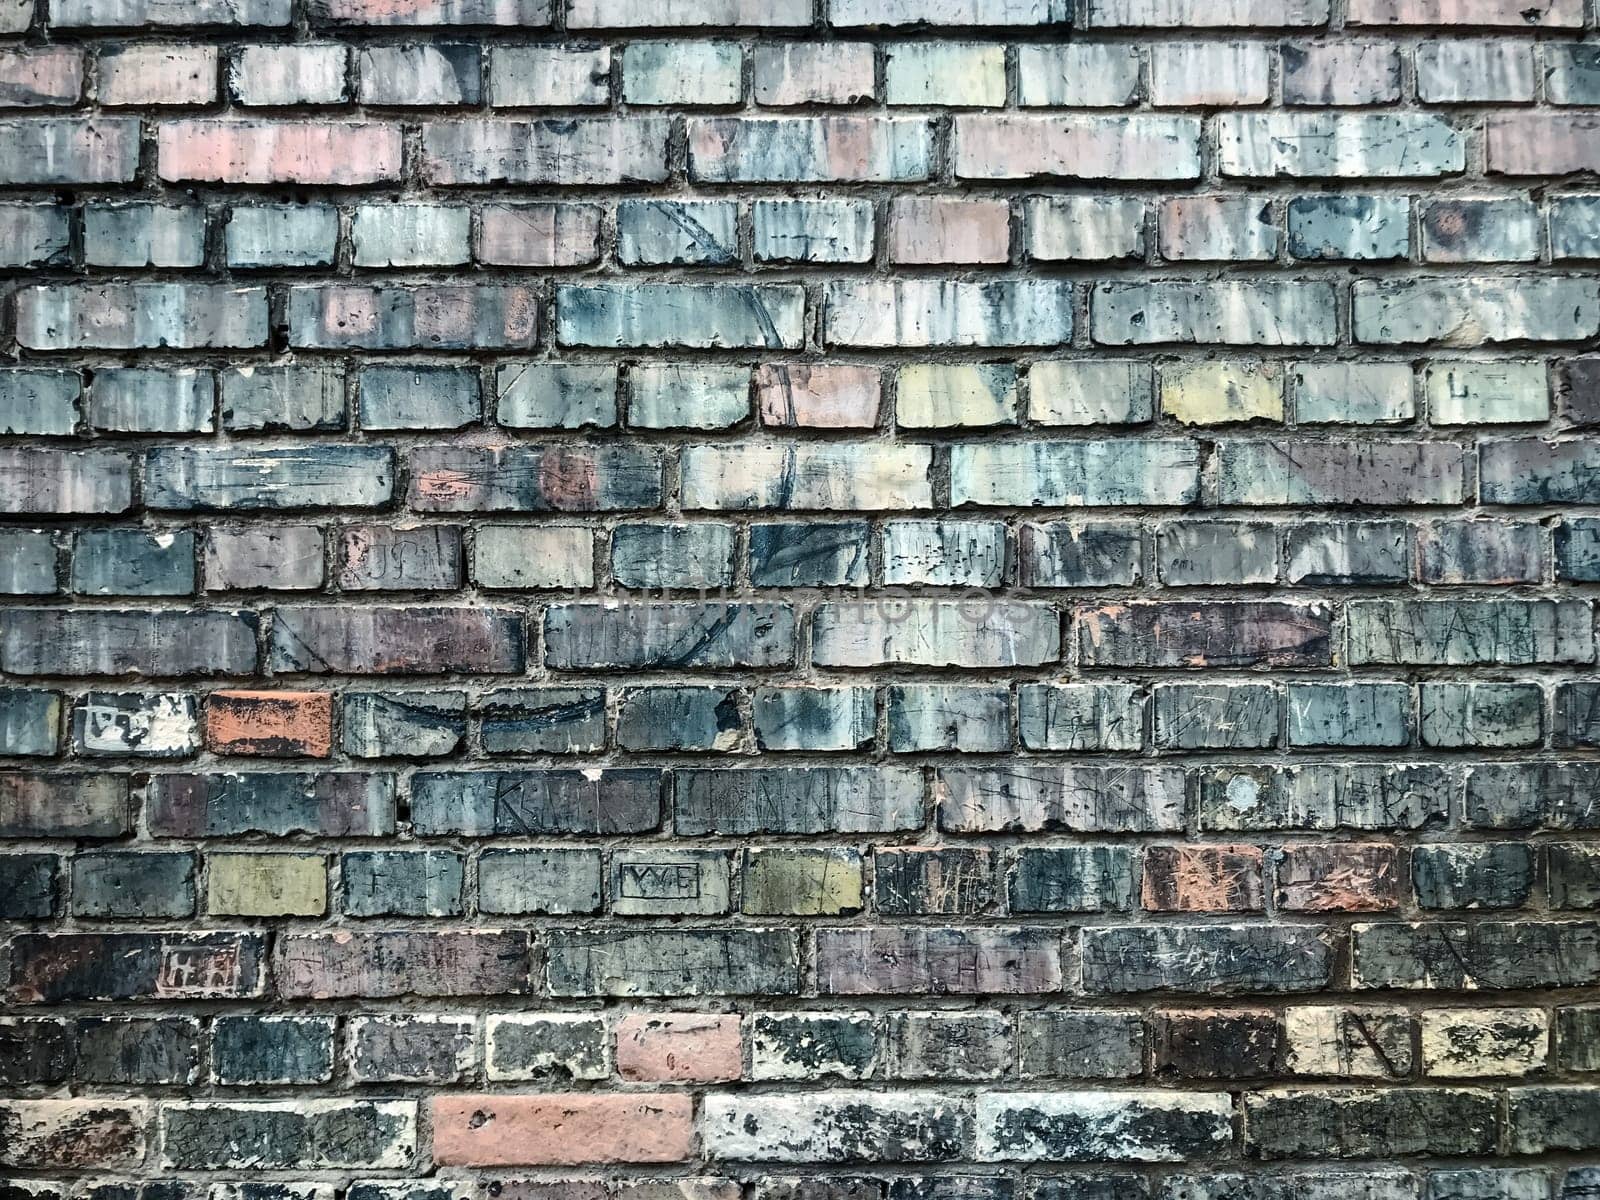 A brick wall with a blue and pink color. The wall is old and has a lot of cracks